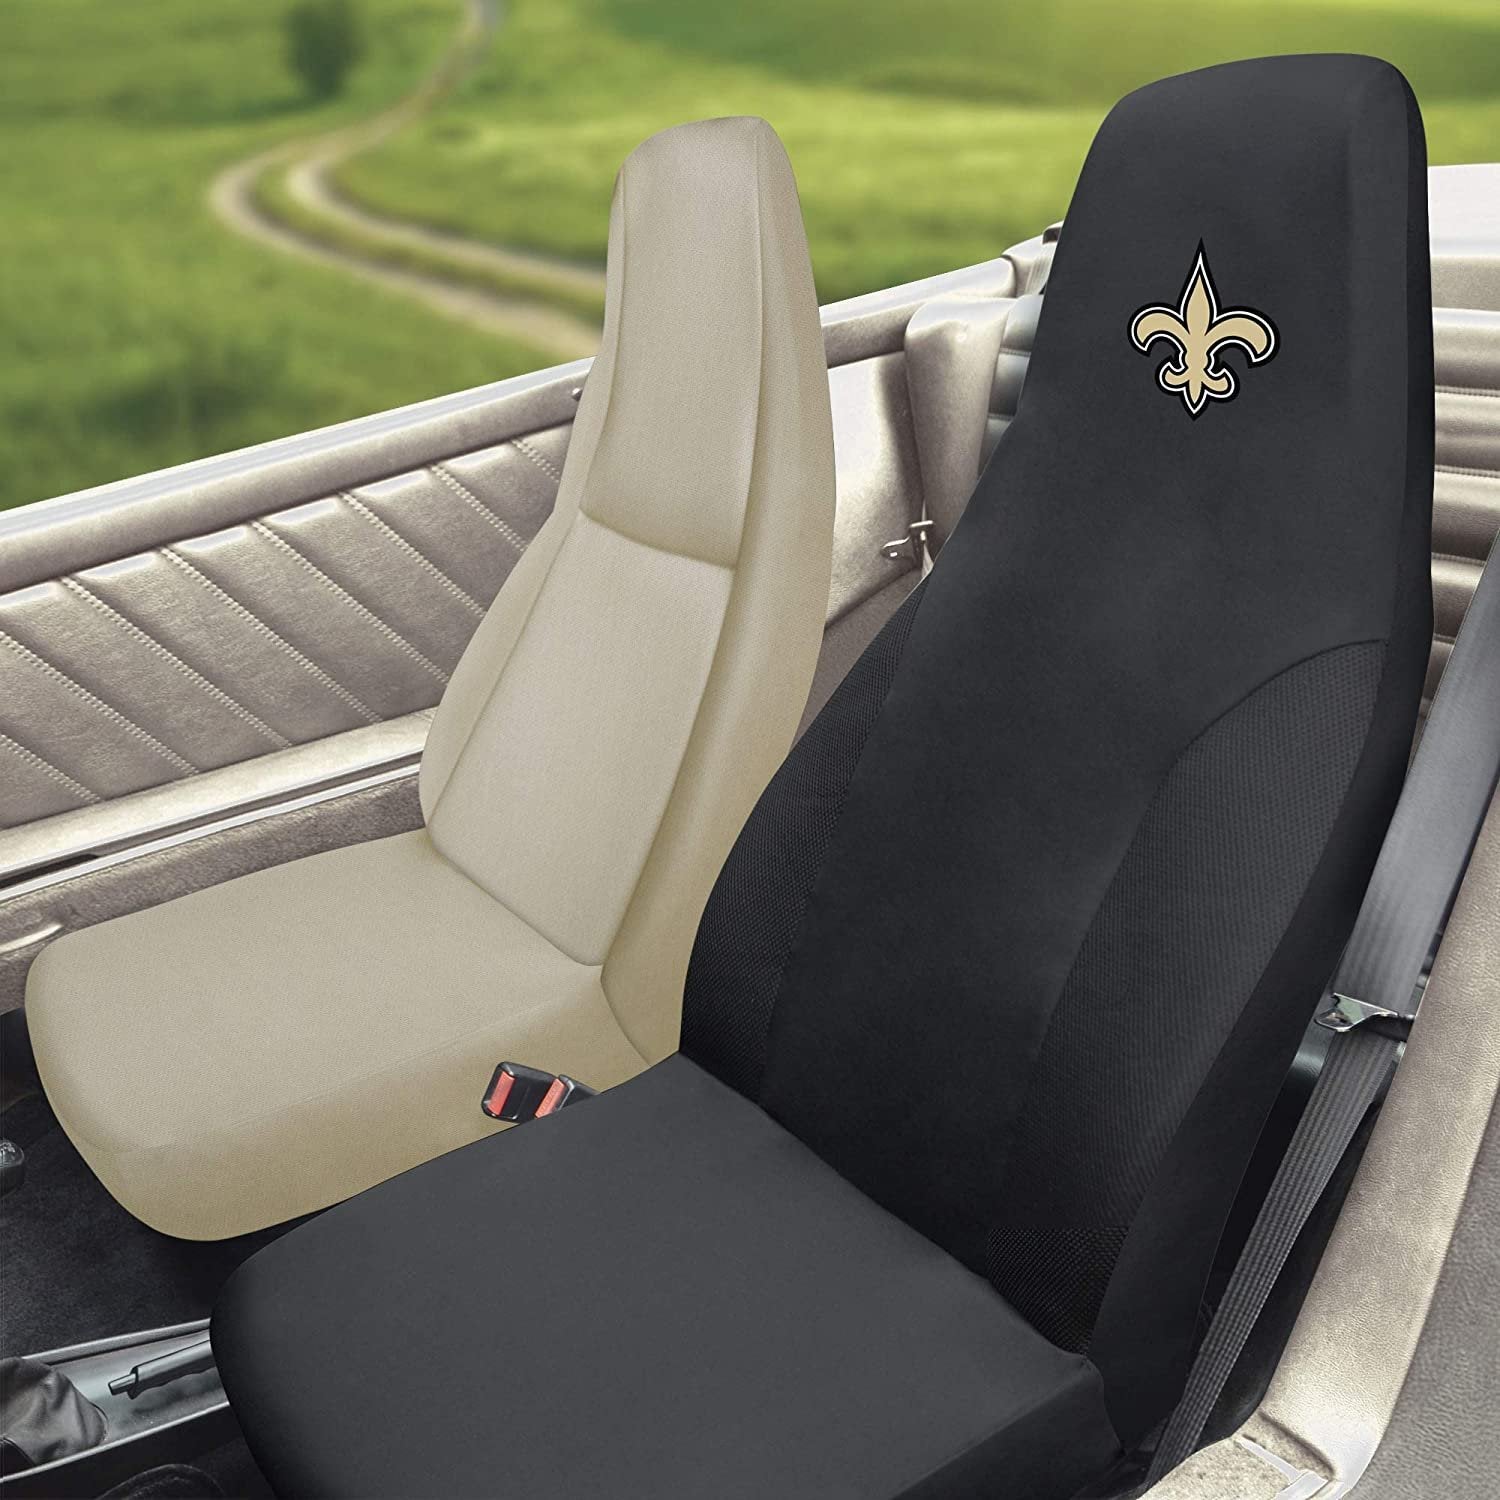 New Orleans Saints Embroidered Seat Cover, Black, 20"x48"